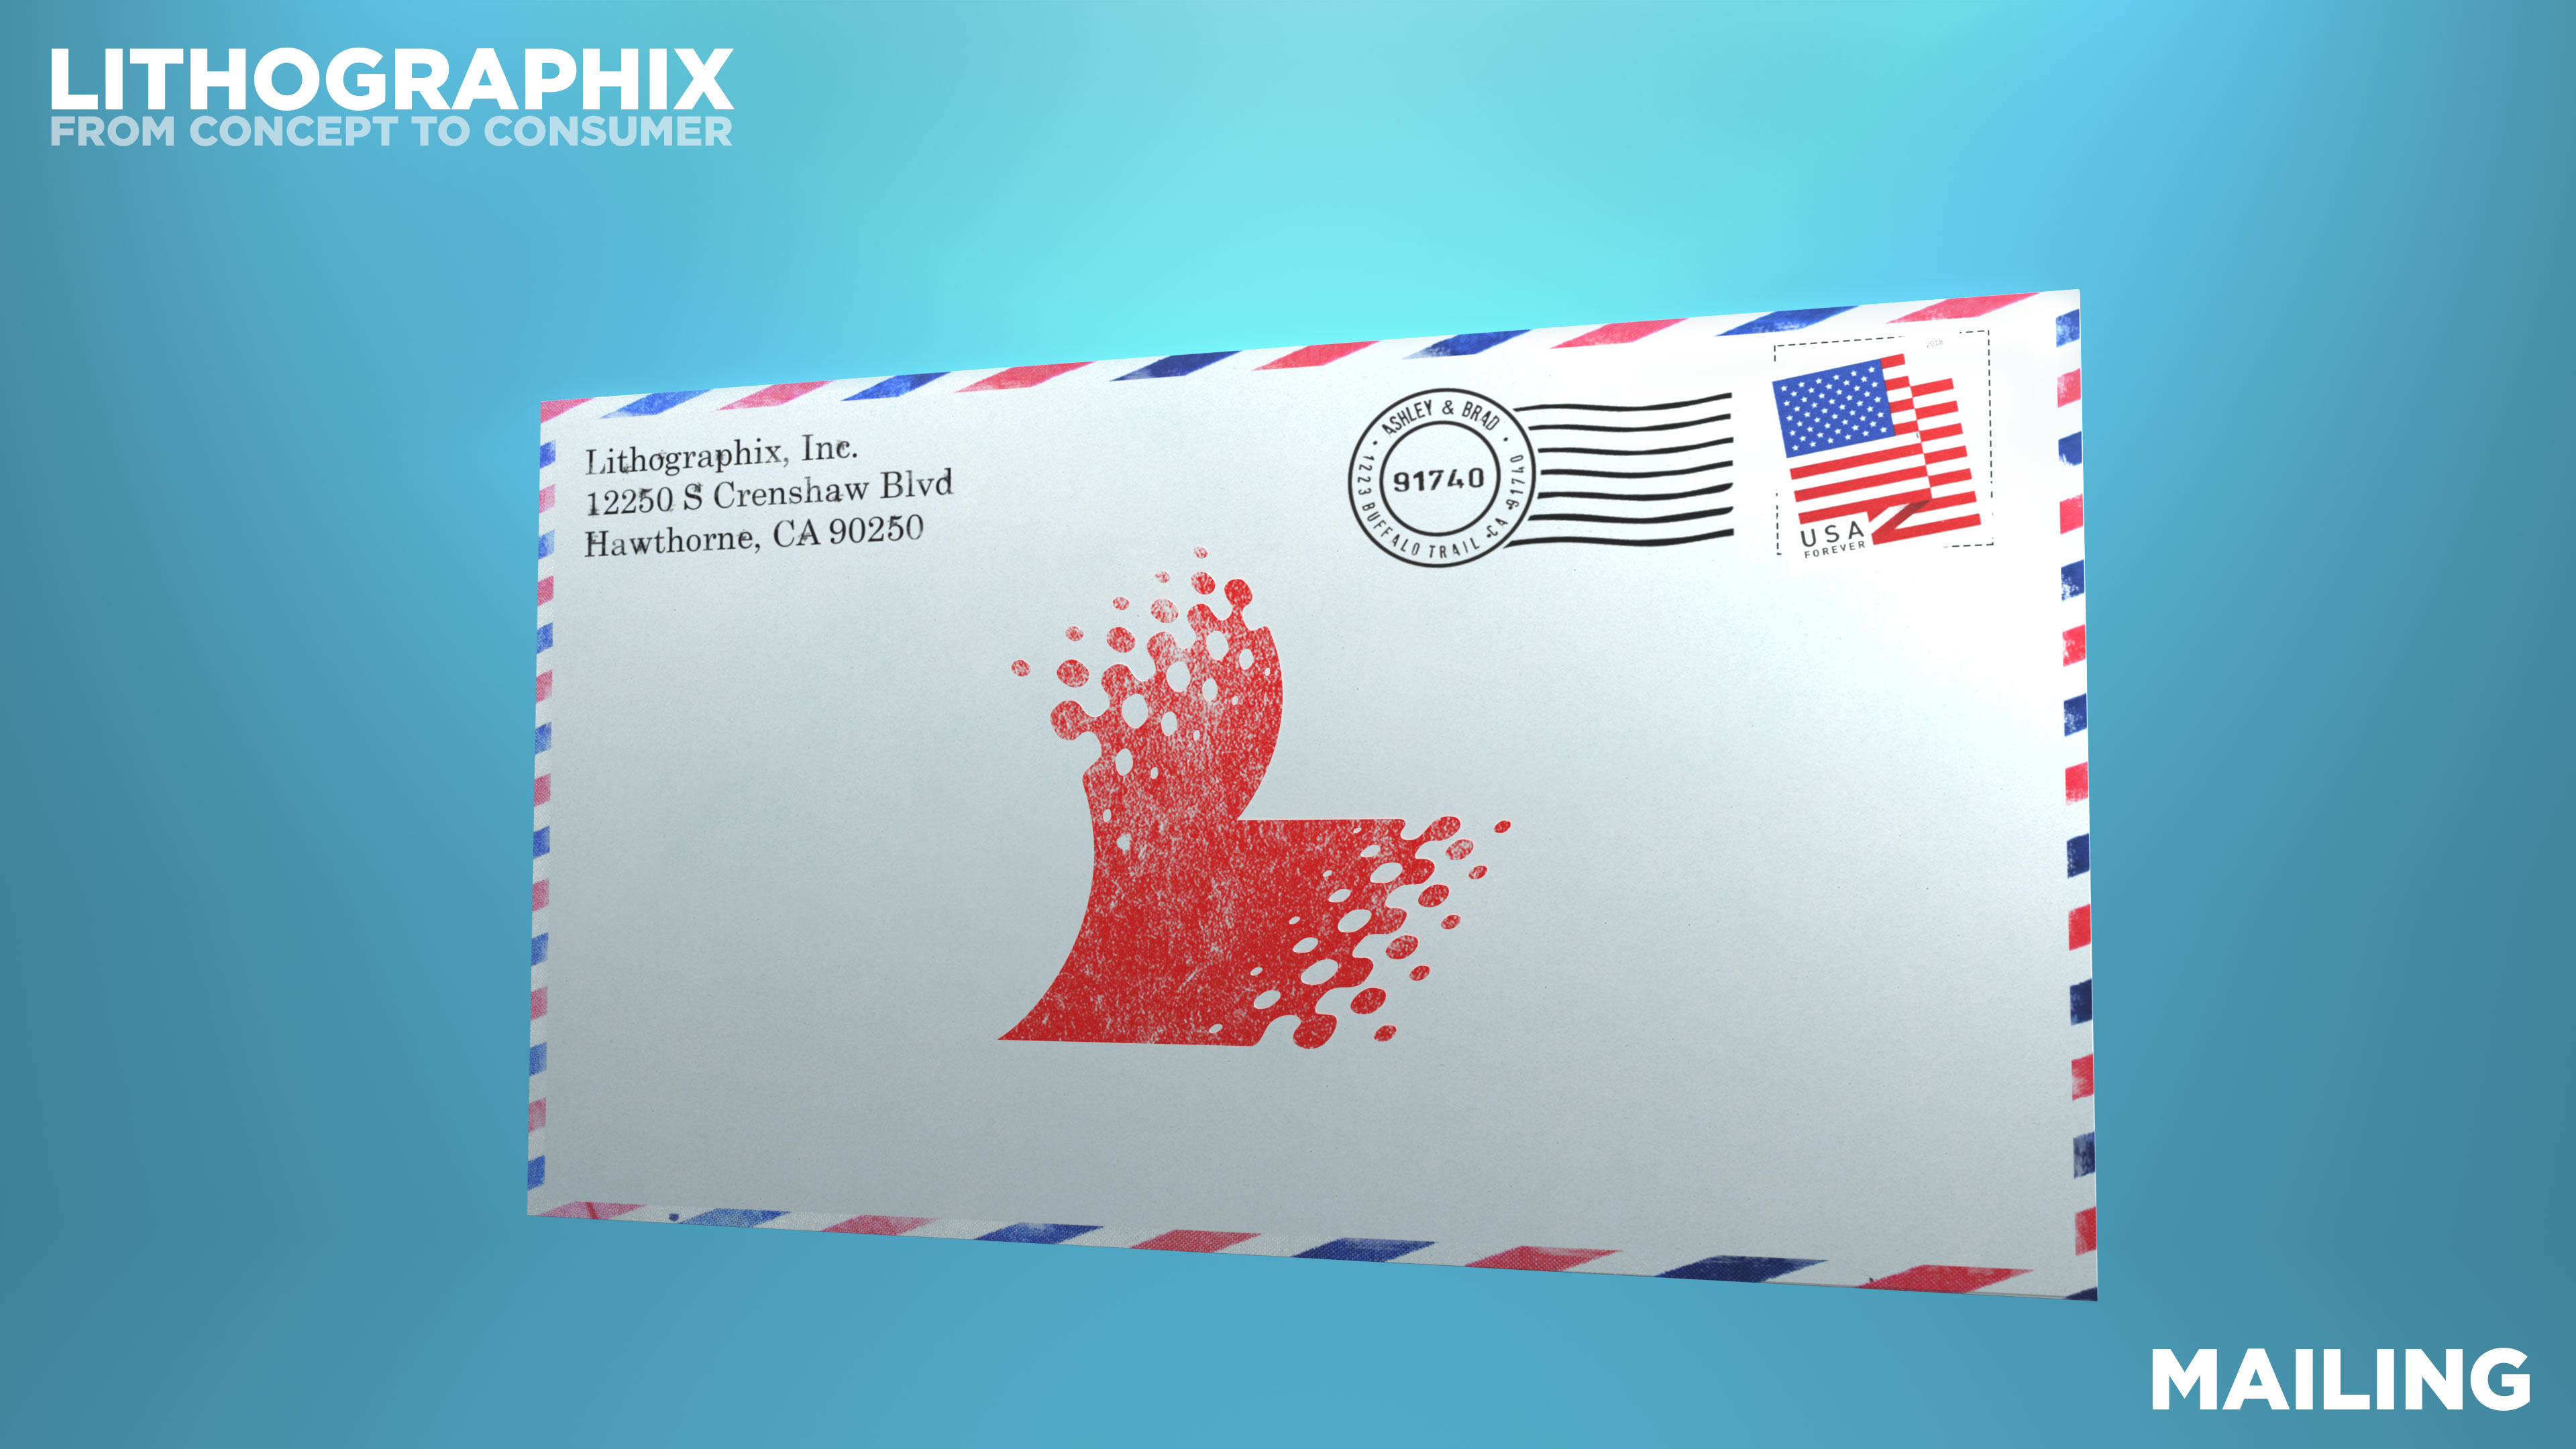 Lithographix Mailing Services